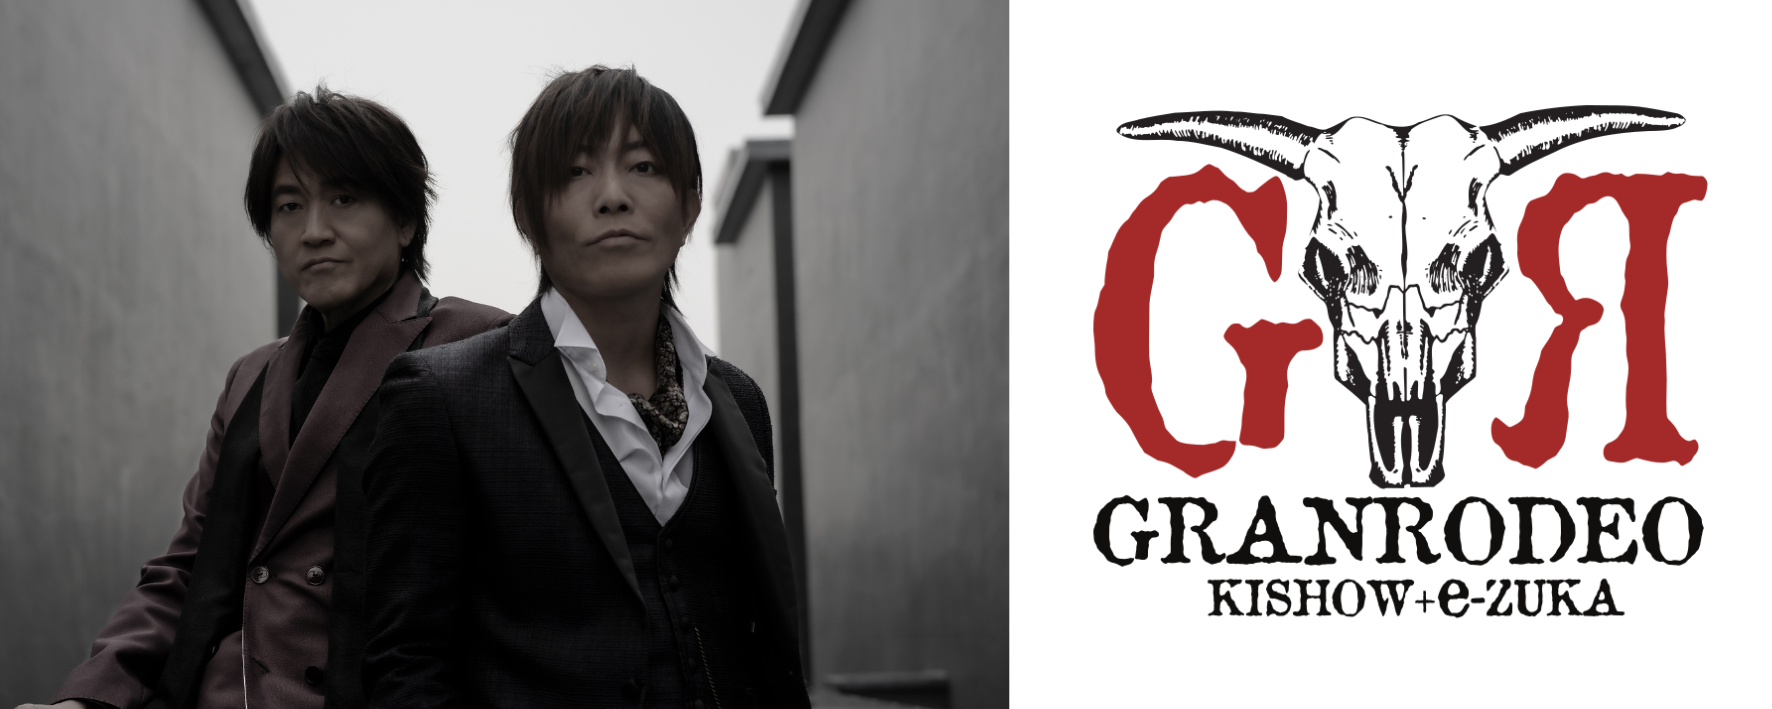 GRANRODEO official store